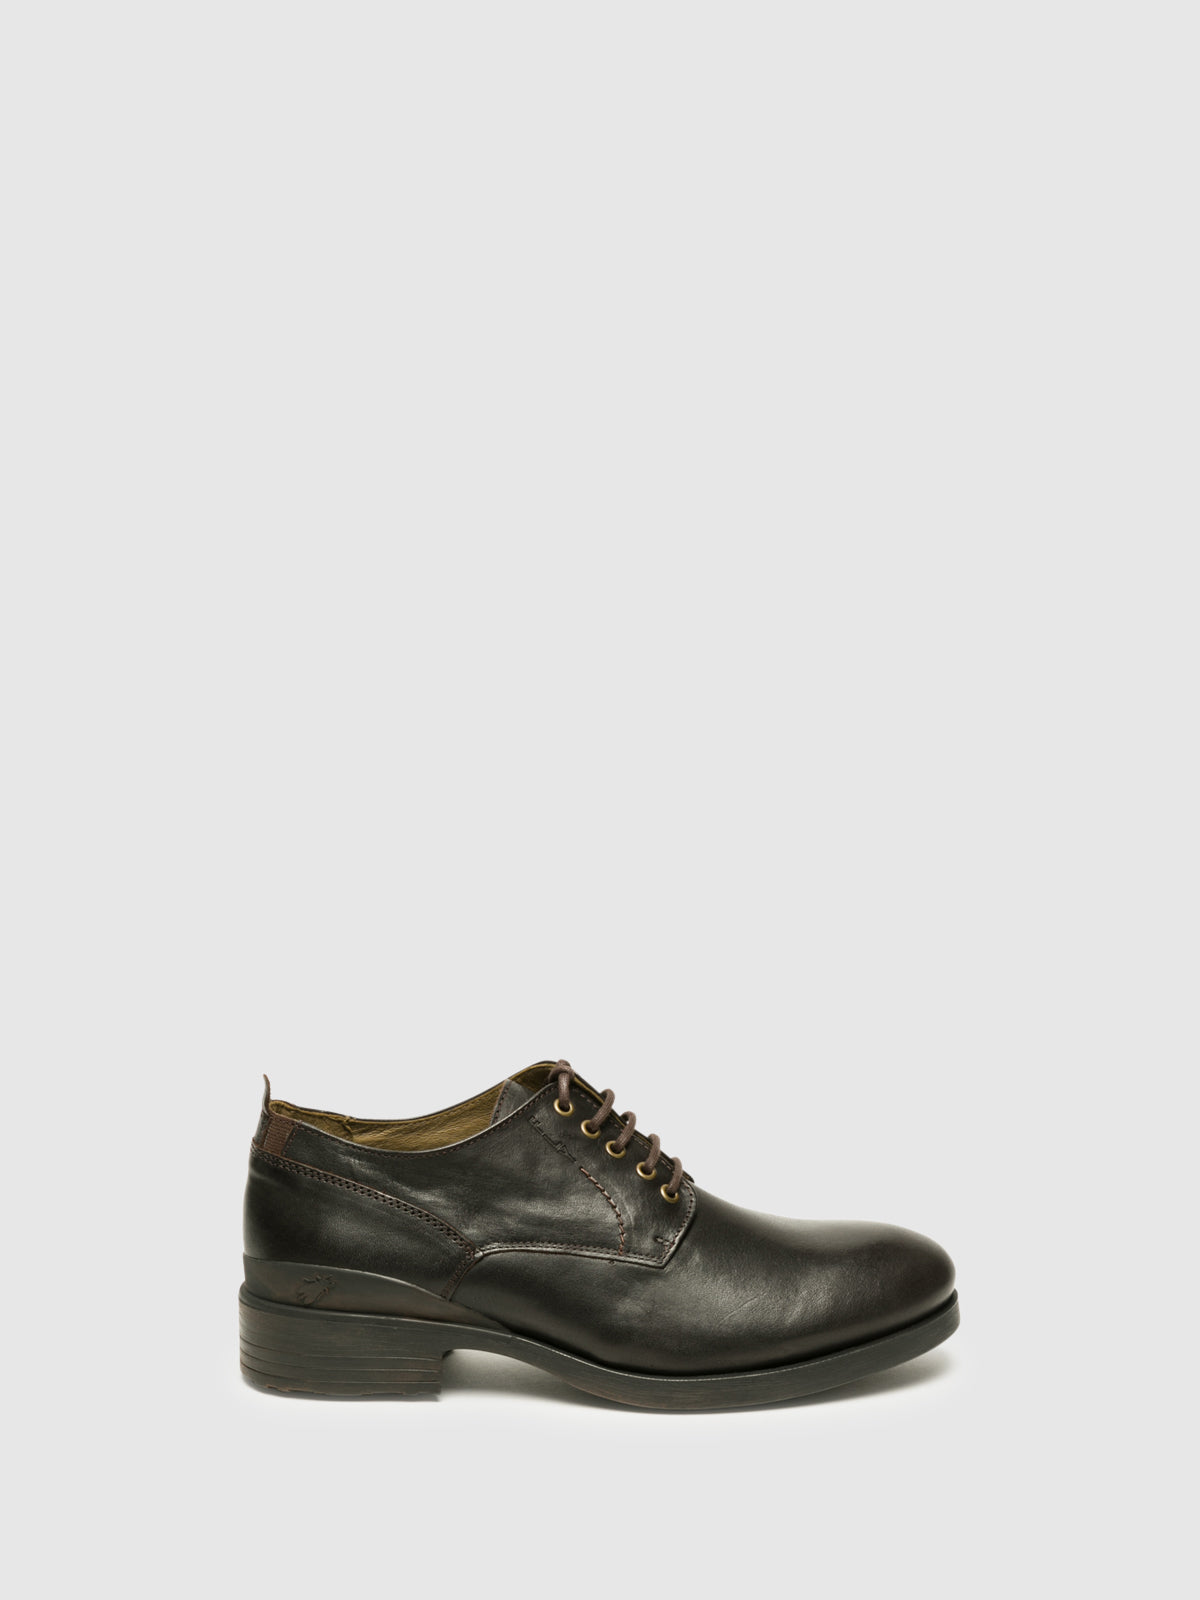 Fly London Brown Derby Shoes